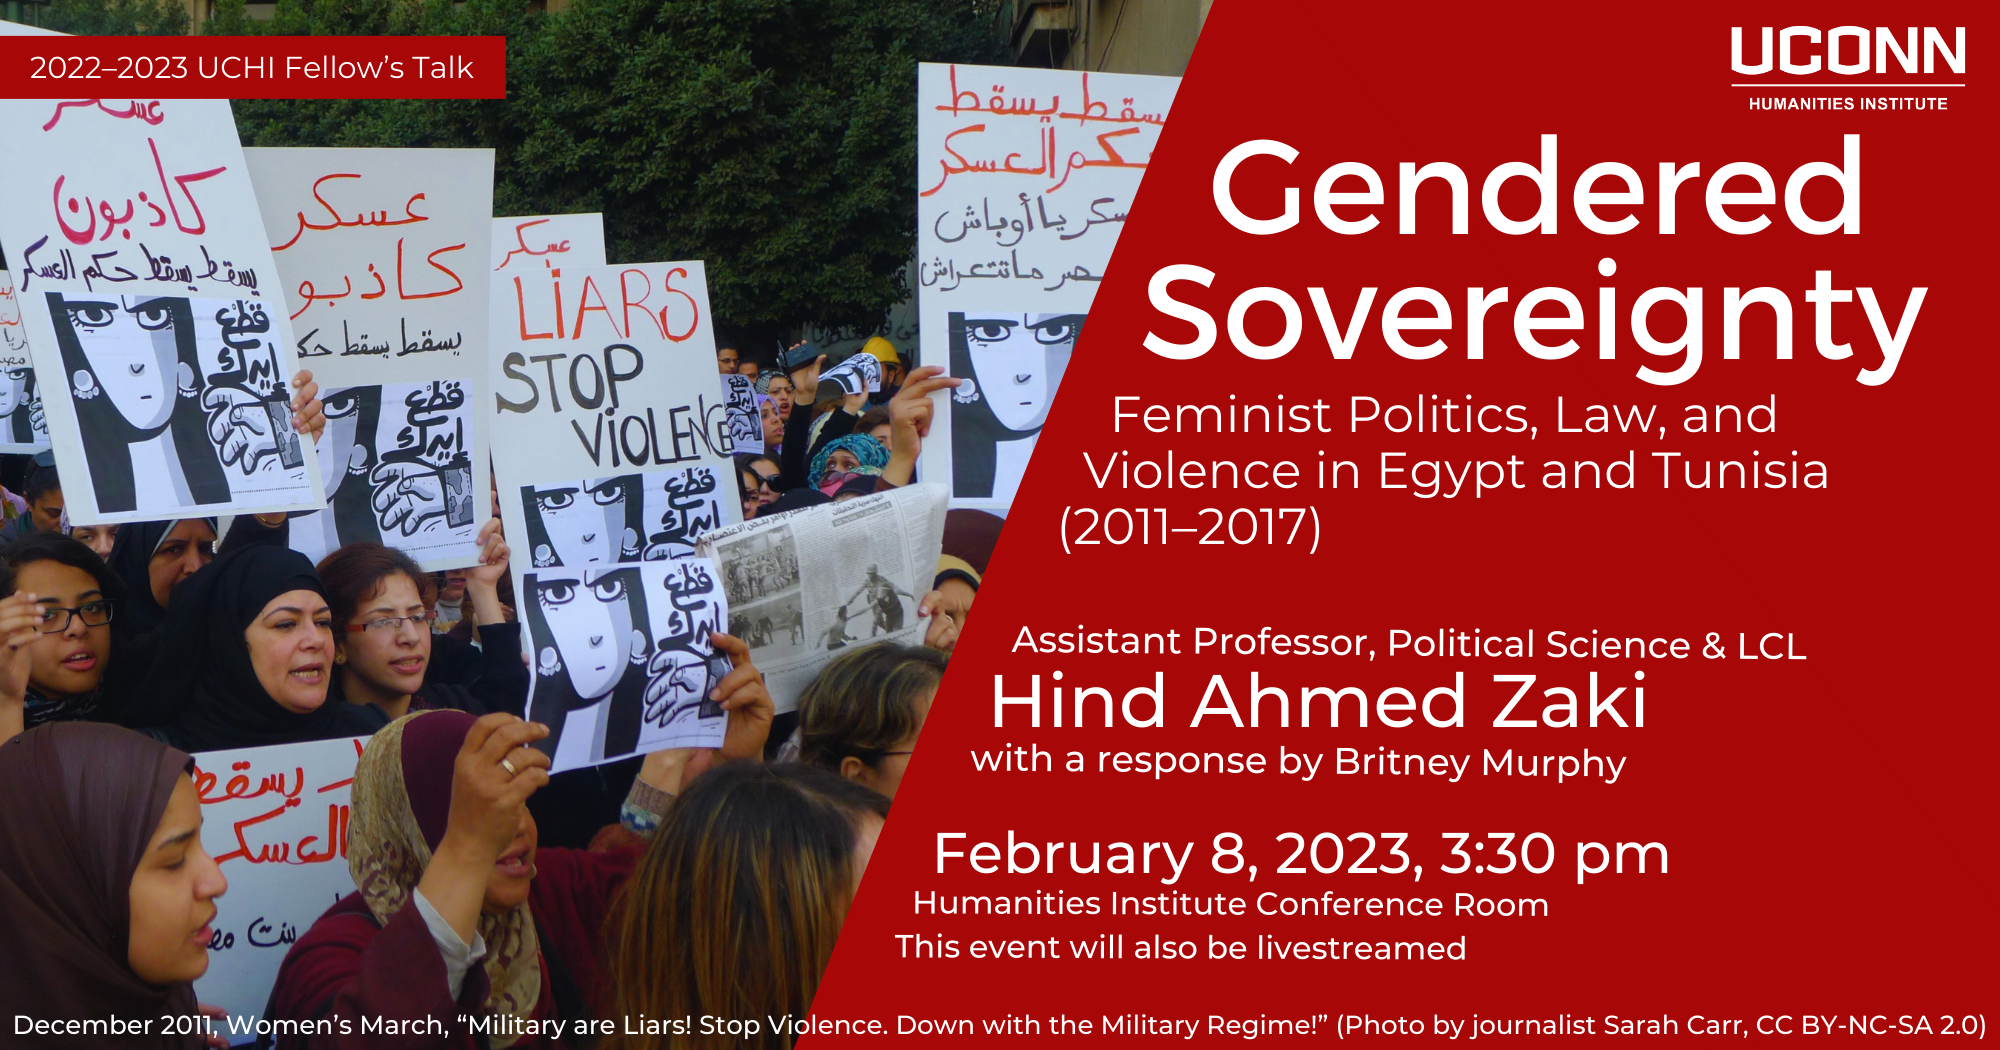 UCHI Fellow's Talks 2022–23. Gendered Sovereignty: Feminist Politics, , Law, and Violence in Egypt and Tunisia (2011-2017). Assistant Professor, Political Science & LCL Hind Ahmed Zaki. With a response by Britney Murphy. February 8, 2023, 3:30pm. Humanities Institute Conference Room. This event will also be livestreamed.